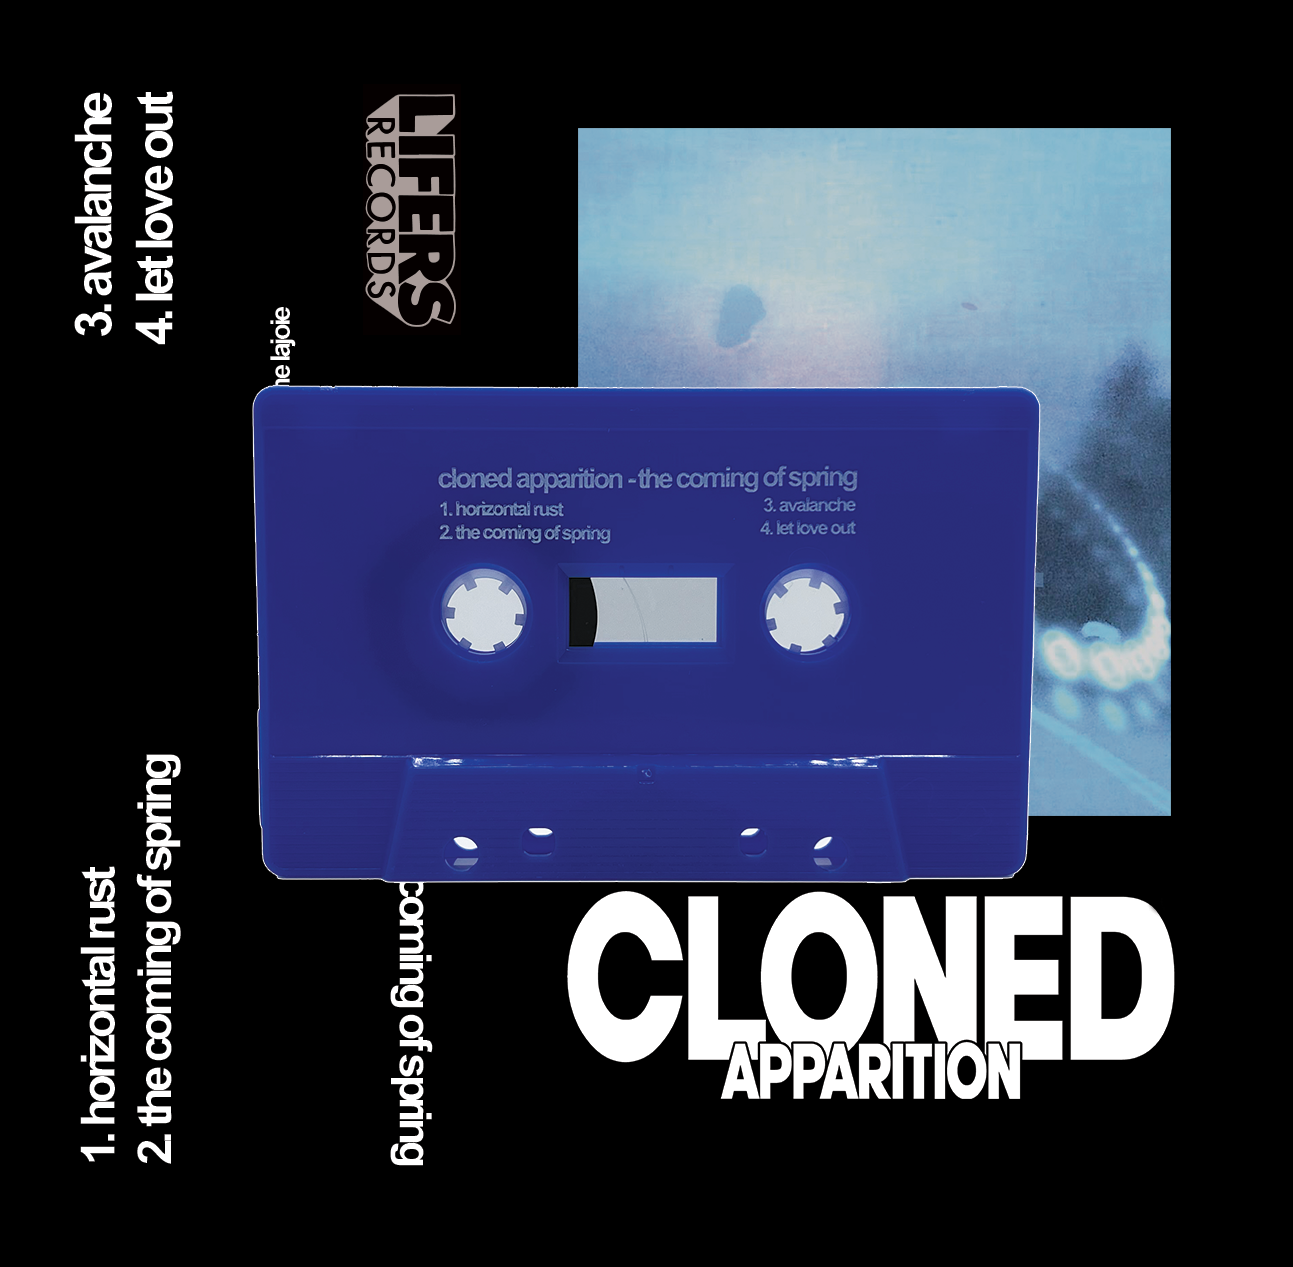 cloned apparition - the coming of spring